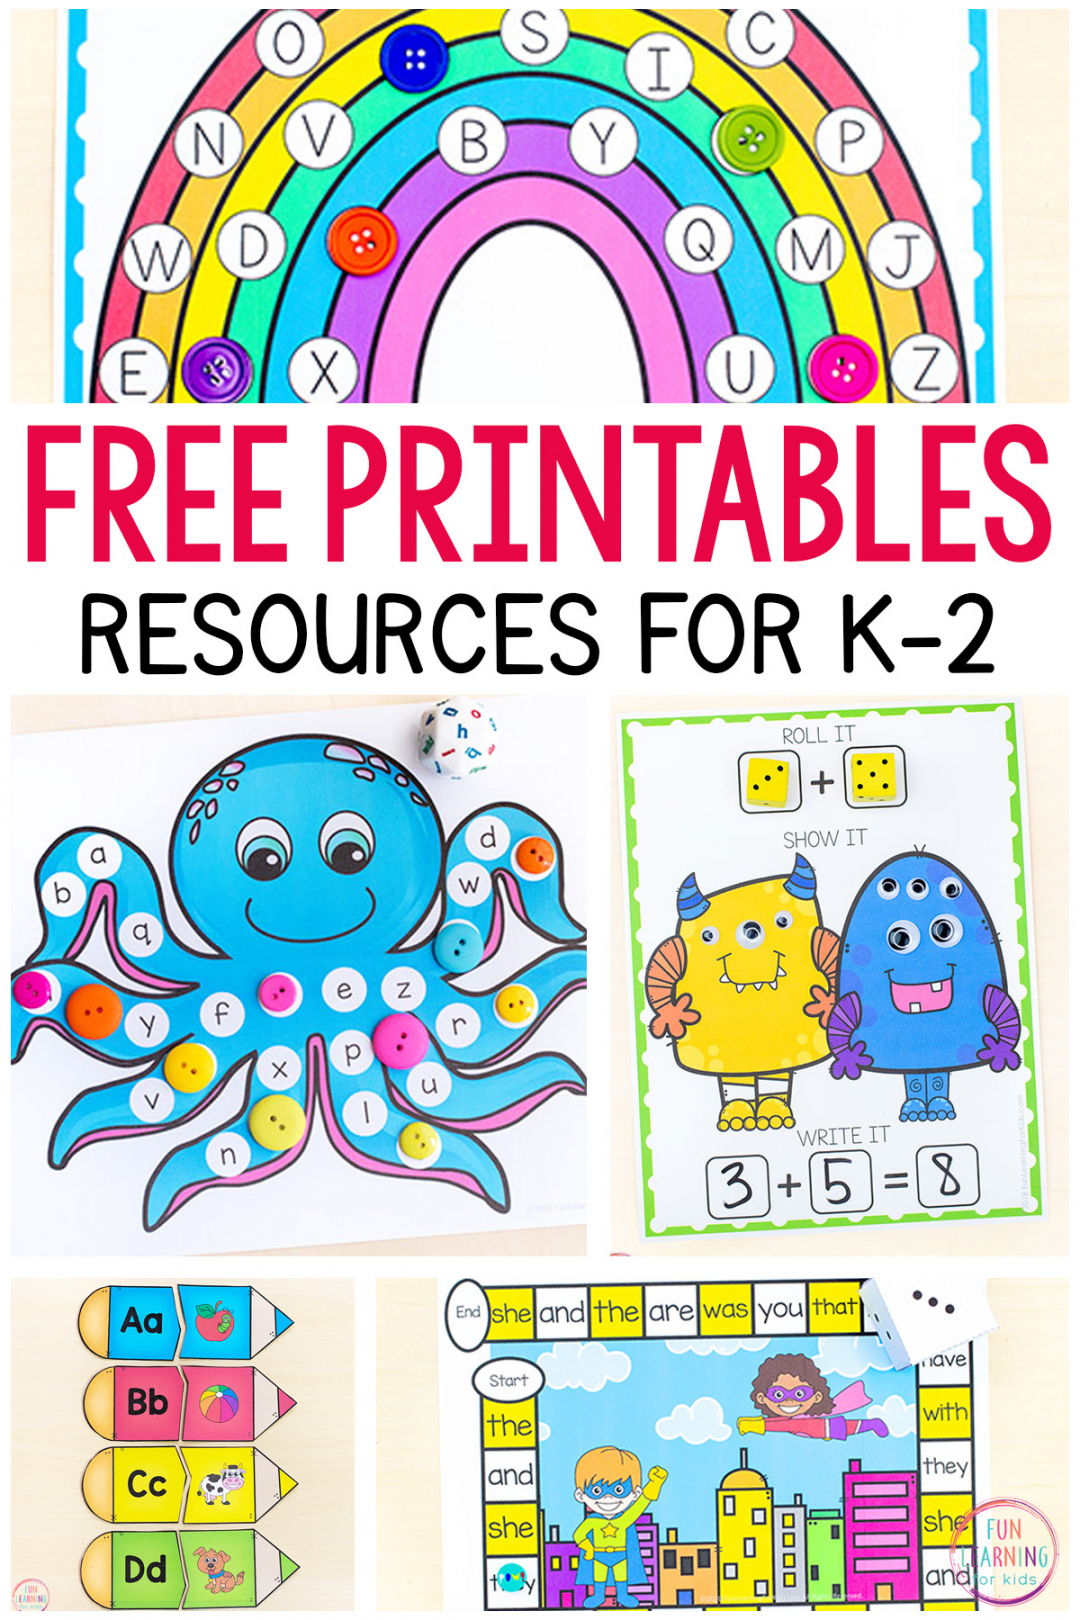 Free Printables For Preschool - Printable - + Free Printables and Activities for Kids